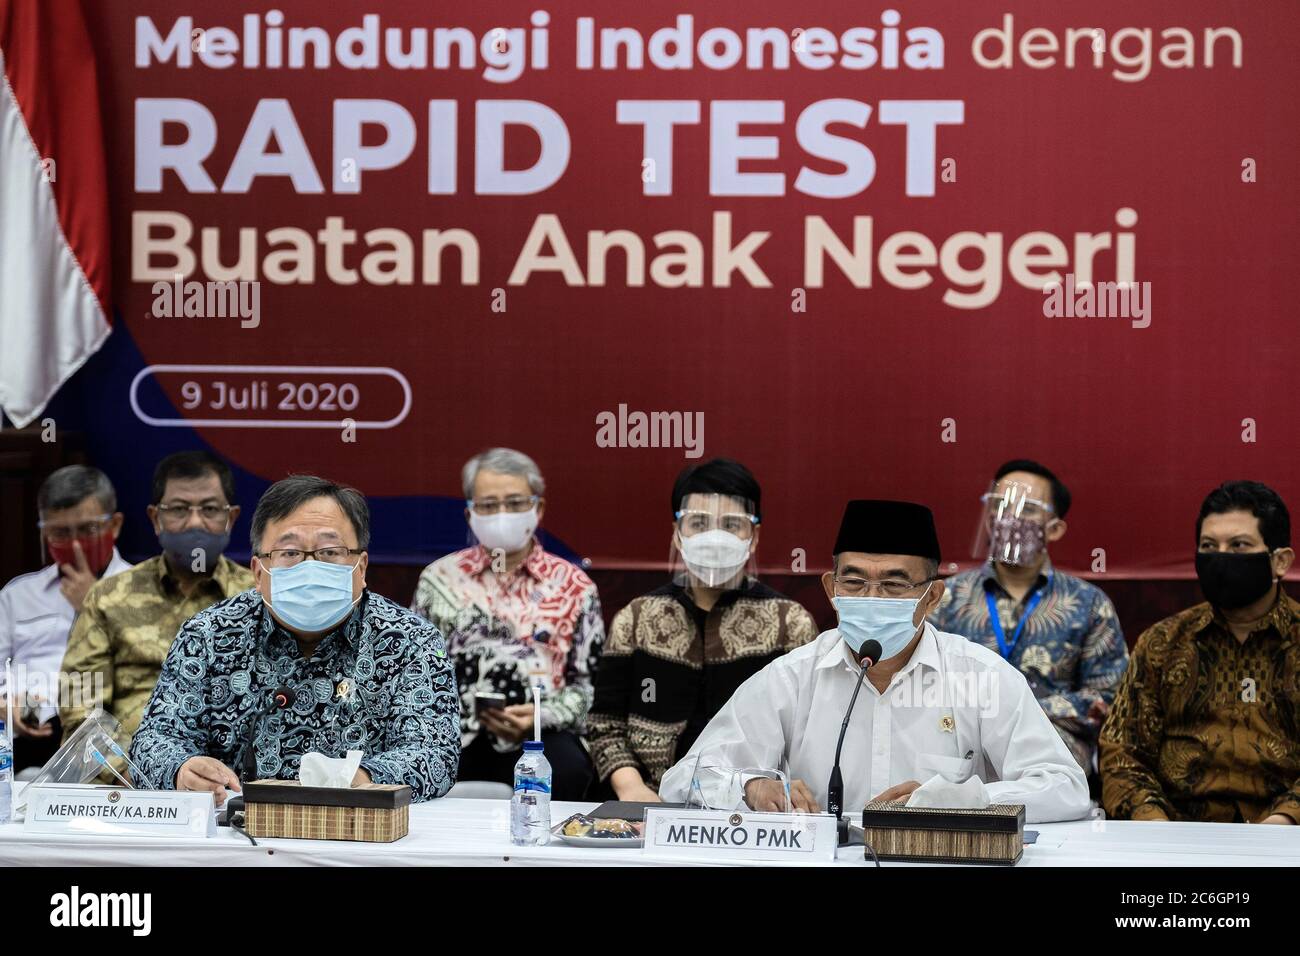 Minister of Research and Technology, Bambang Permadi Soemantri Brodjonegoro (left) andCoordinating Minister for Human Development and Culture of the Republic of Indonesia, Muhadjir Effendy (right) during the launched a kit RI-GHA COVID-19 rapid test in Jakarta, indonesia, on July 9, 2020. The rapid test was to detect early Coronavirus (COVID-19) infections in government employees in order to prevent the spread. The test was also to mark a new normal order by implementing strict health protocols. (Photo by Evan Praditya/INA Photo Agency/Sipa USA) Stock Photo